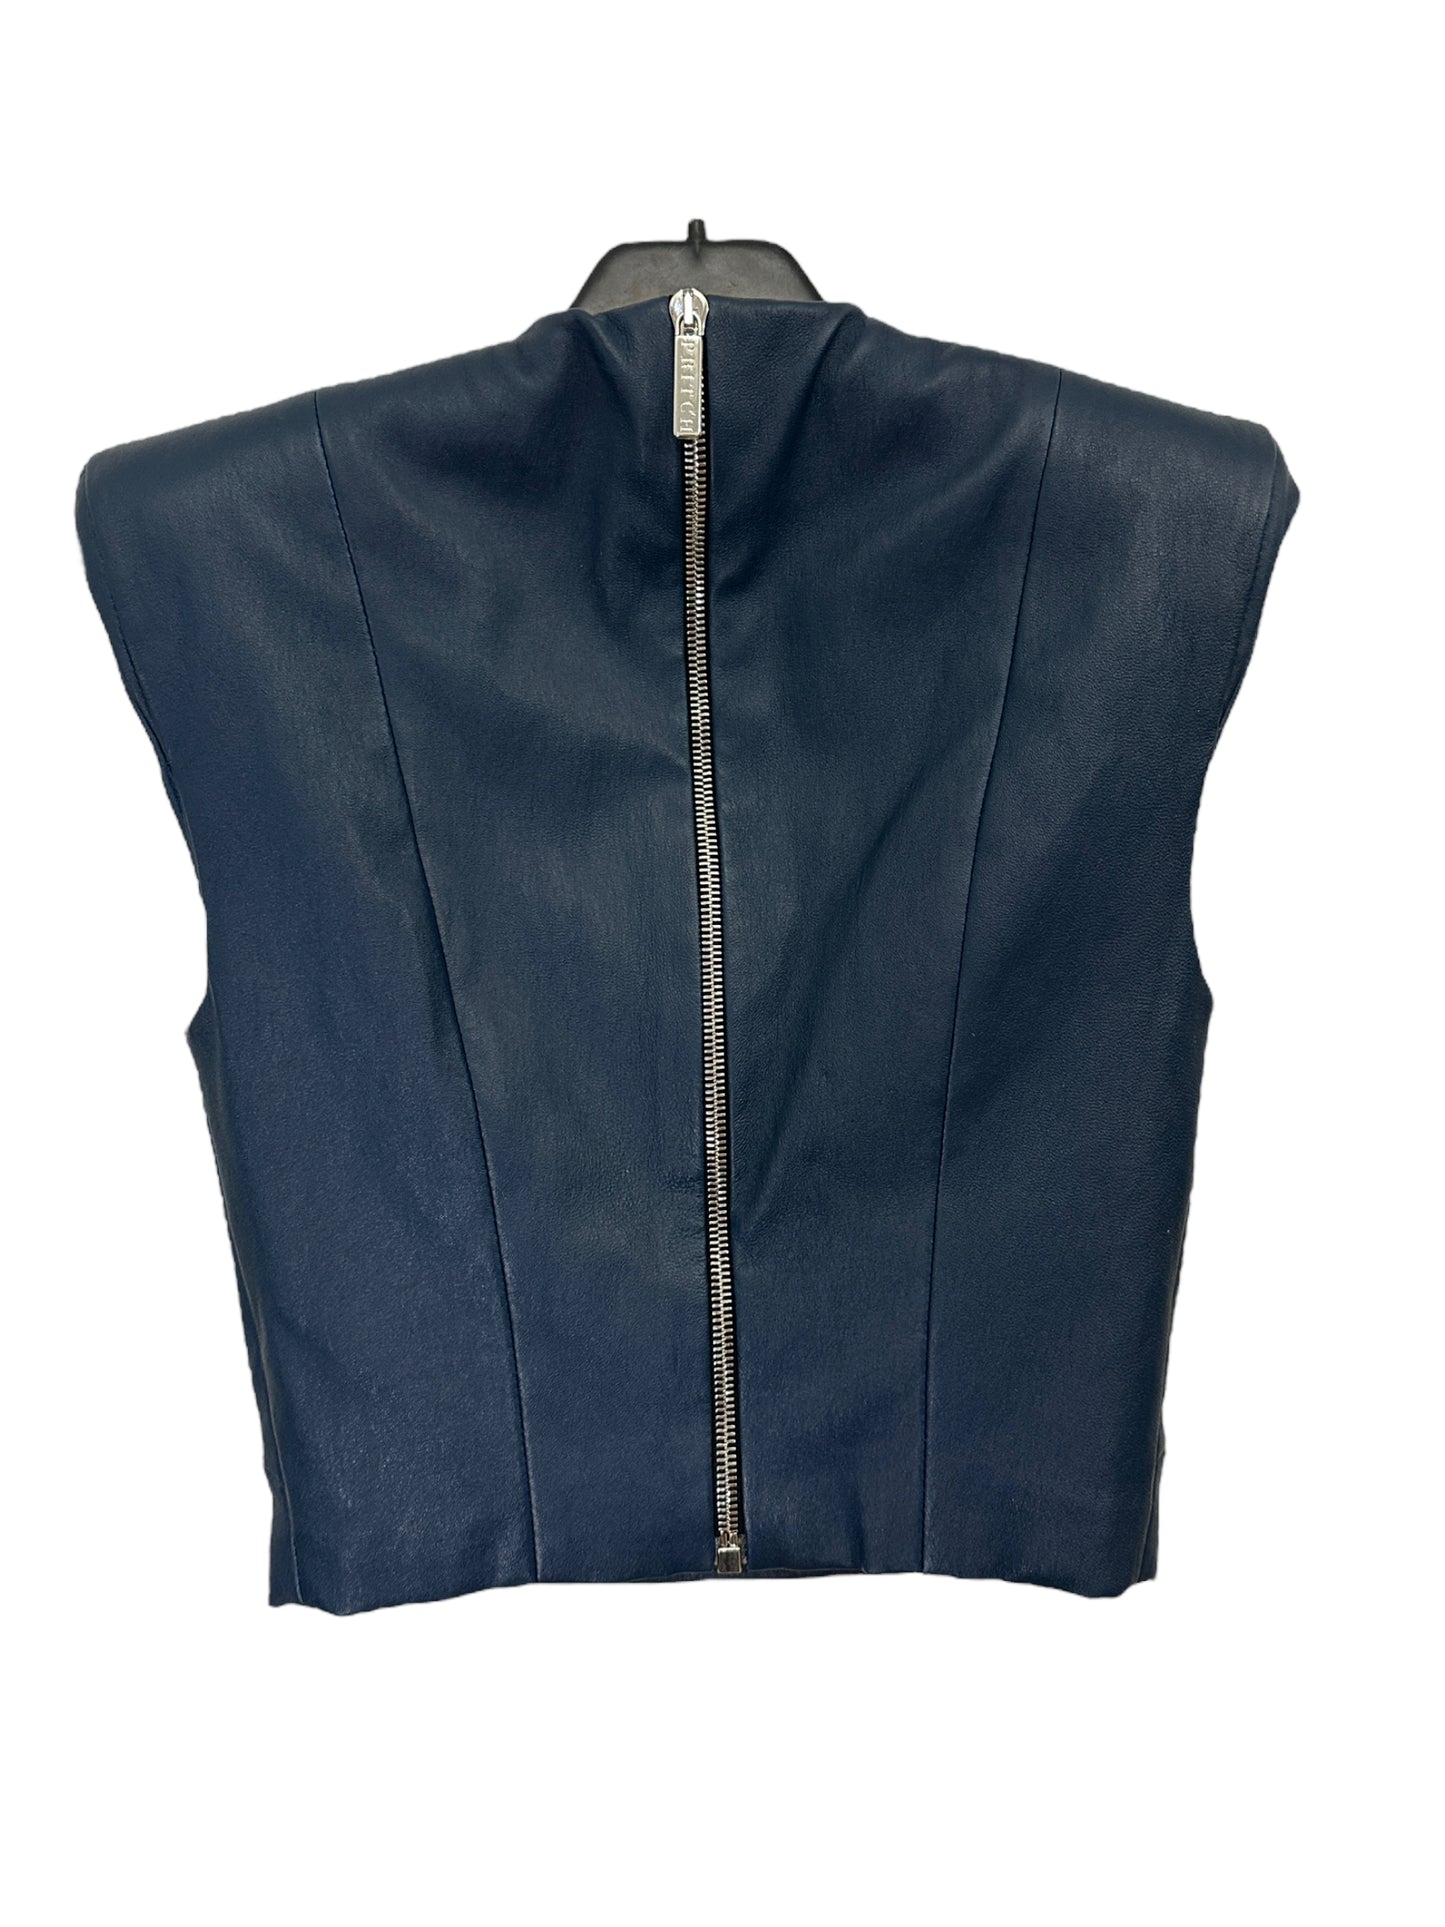 PRITCH LONDON Leather Crop Top in Navy- Size 8